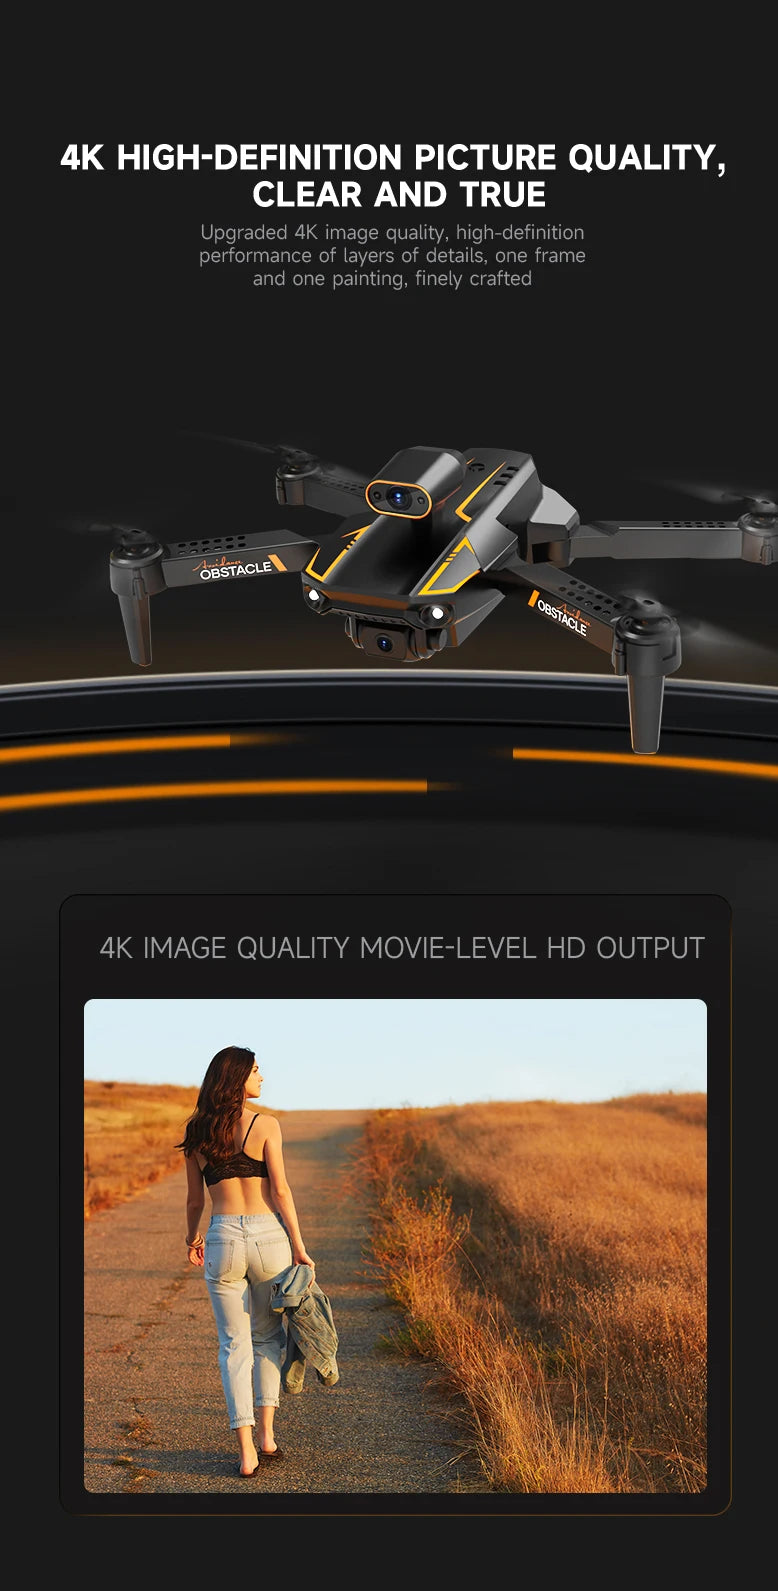 S91 Drone, finely crafted 4k image quality movie-level hd